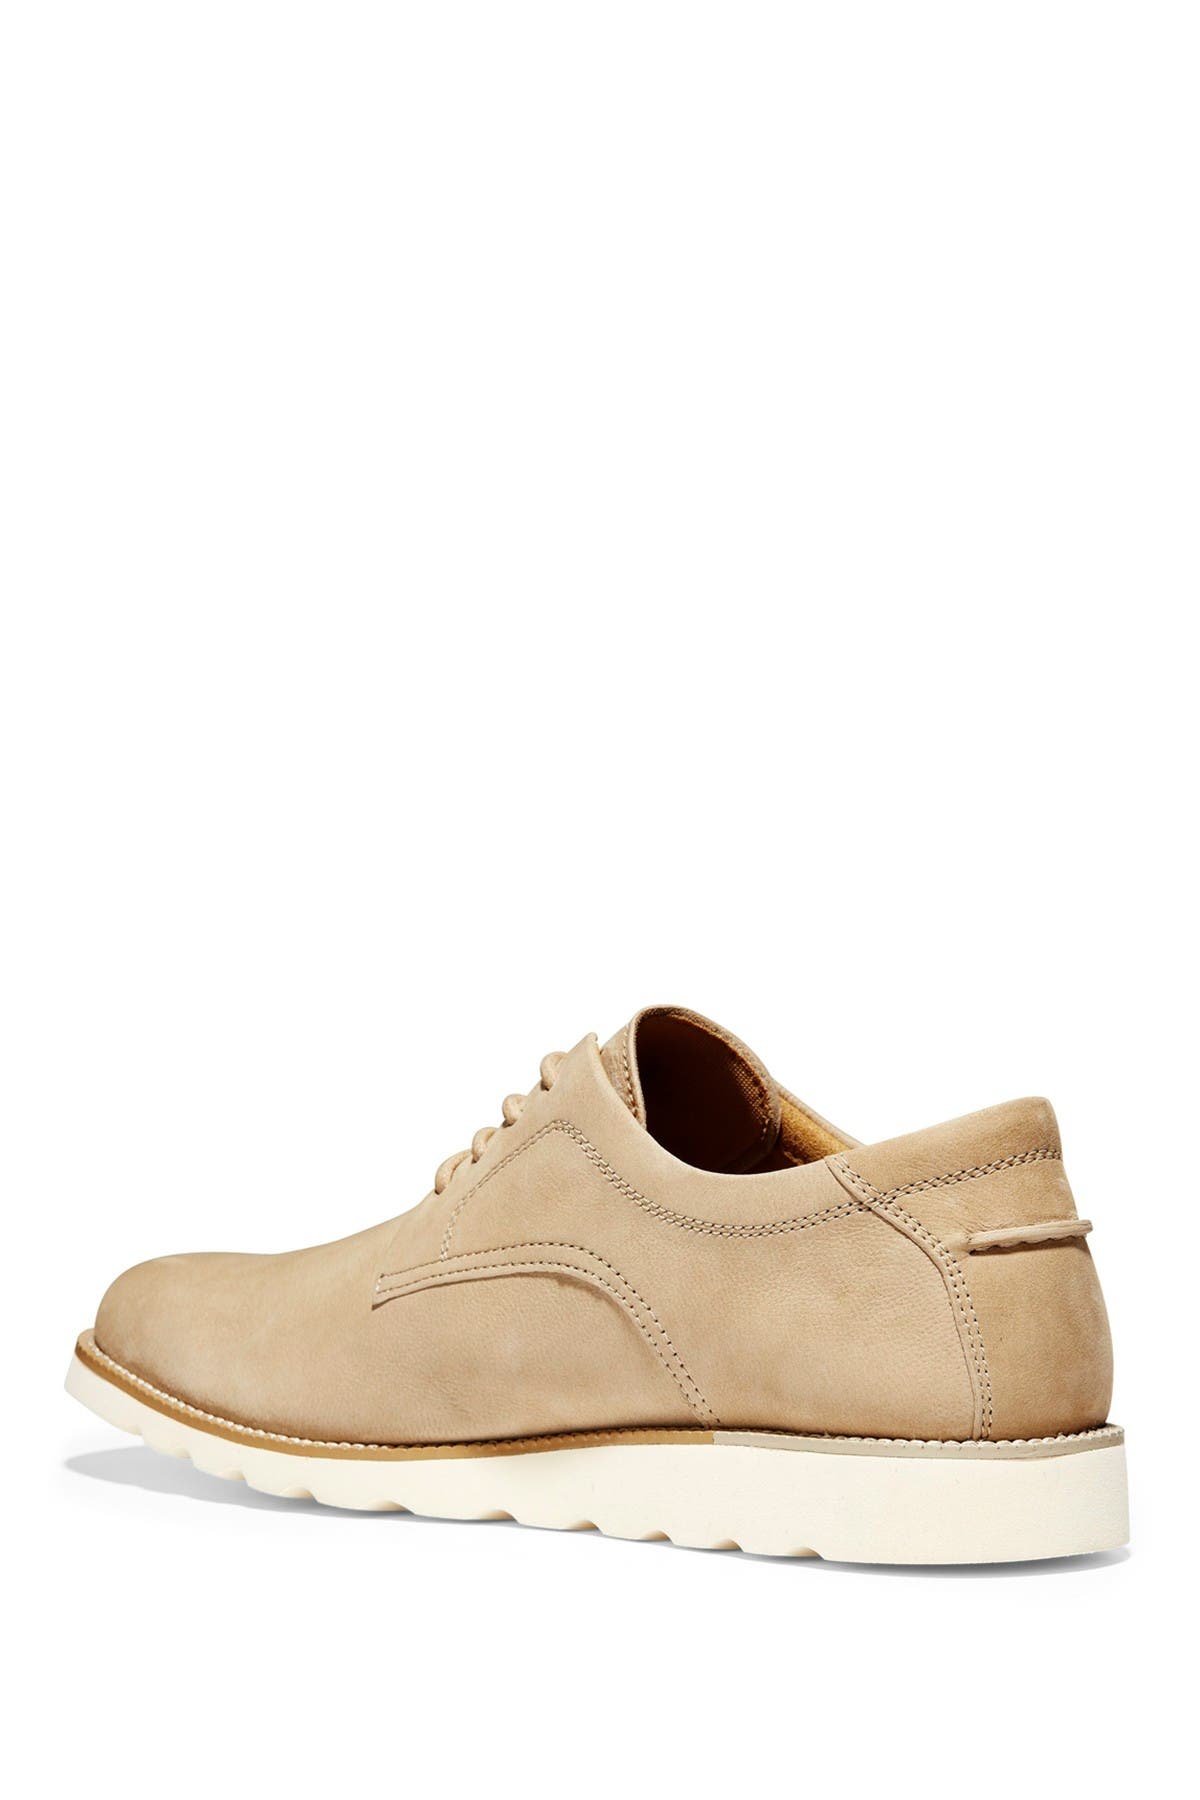 cole haan suede oxford